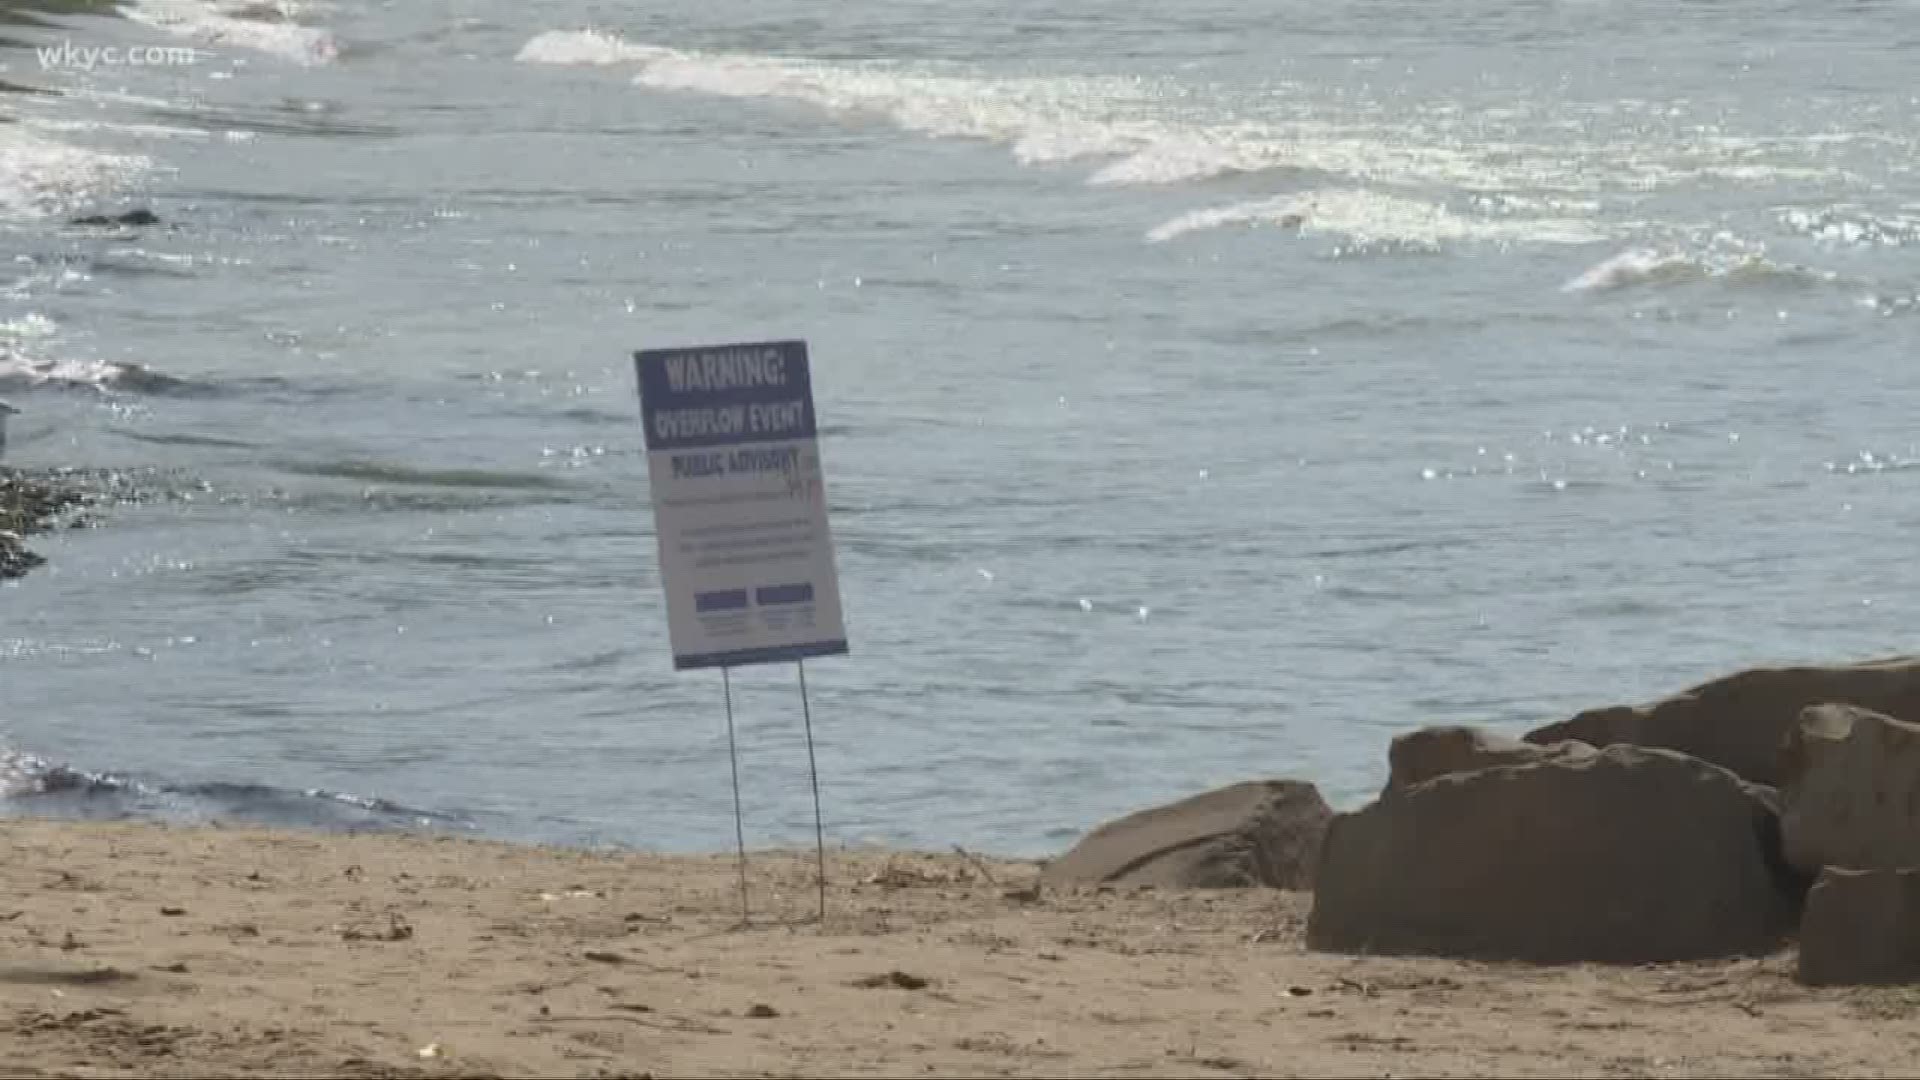 Edgewater Beach Conditions Safe For Swimming Ahead Of Usa